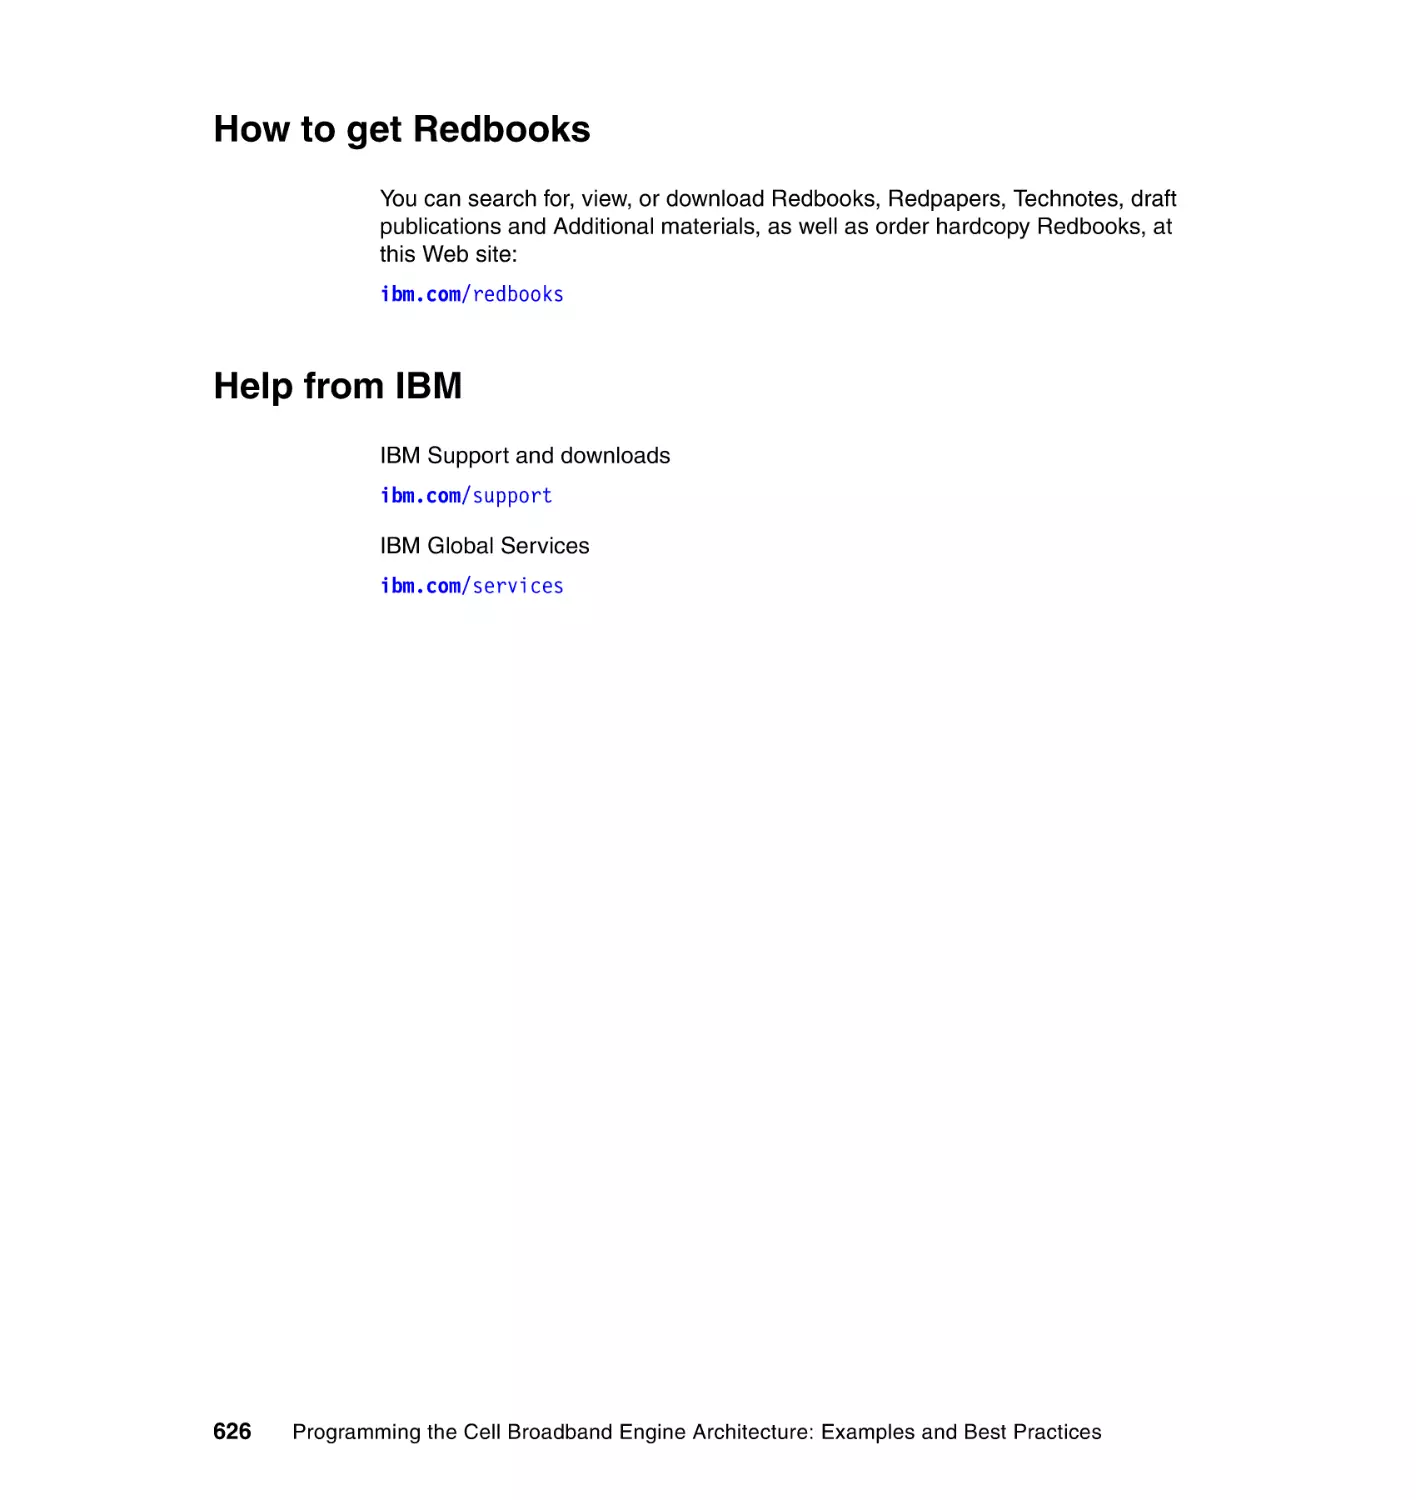 How to get Redbooks
Help from IBM